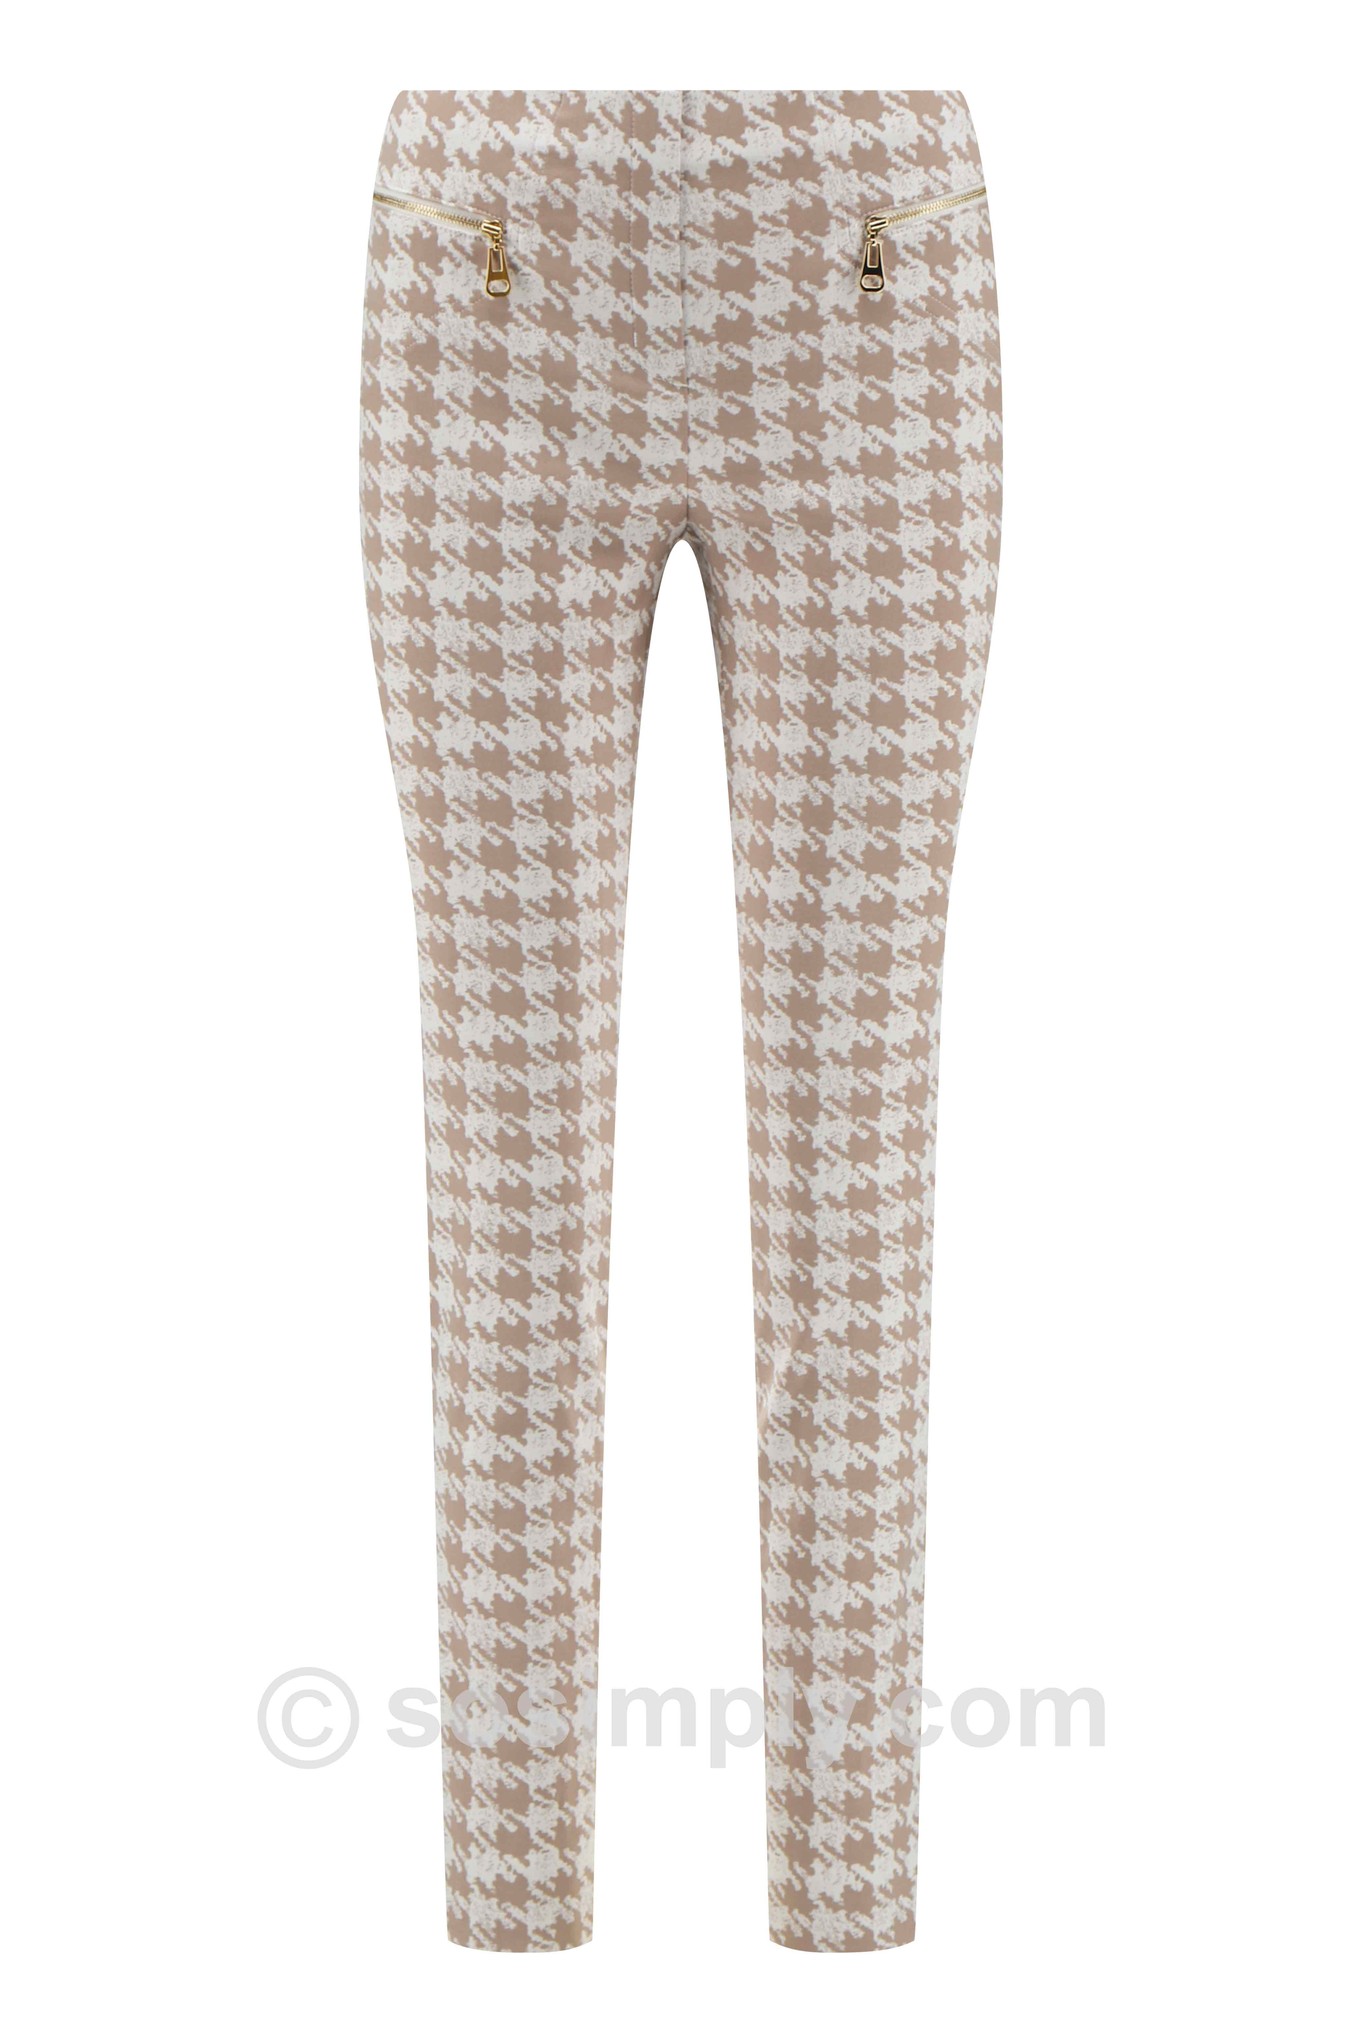 Robell Mimi Decadent Houndstooth Trouser